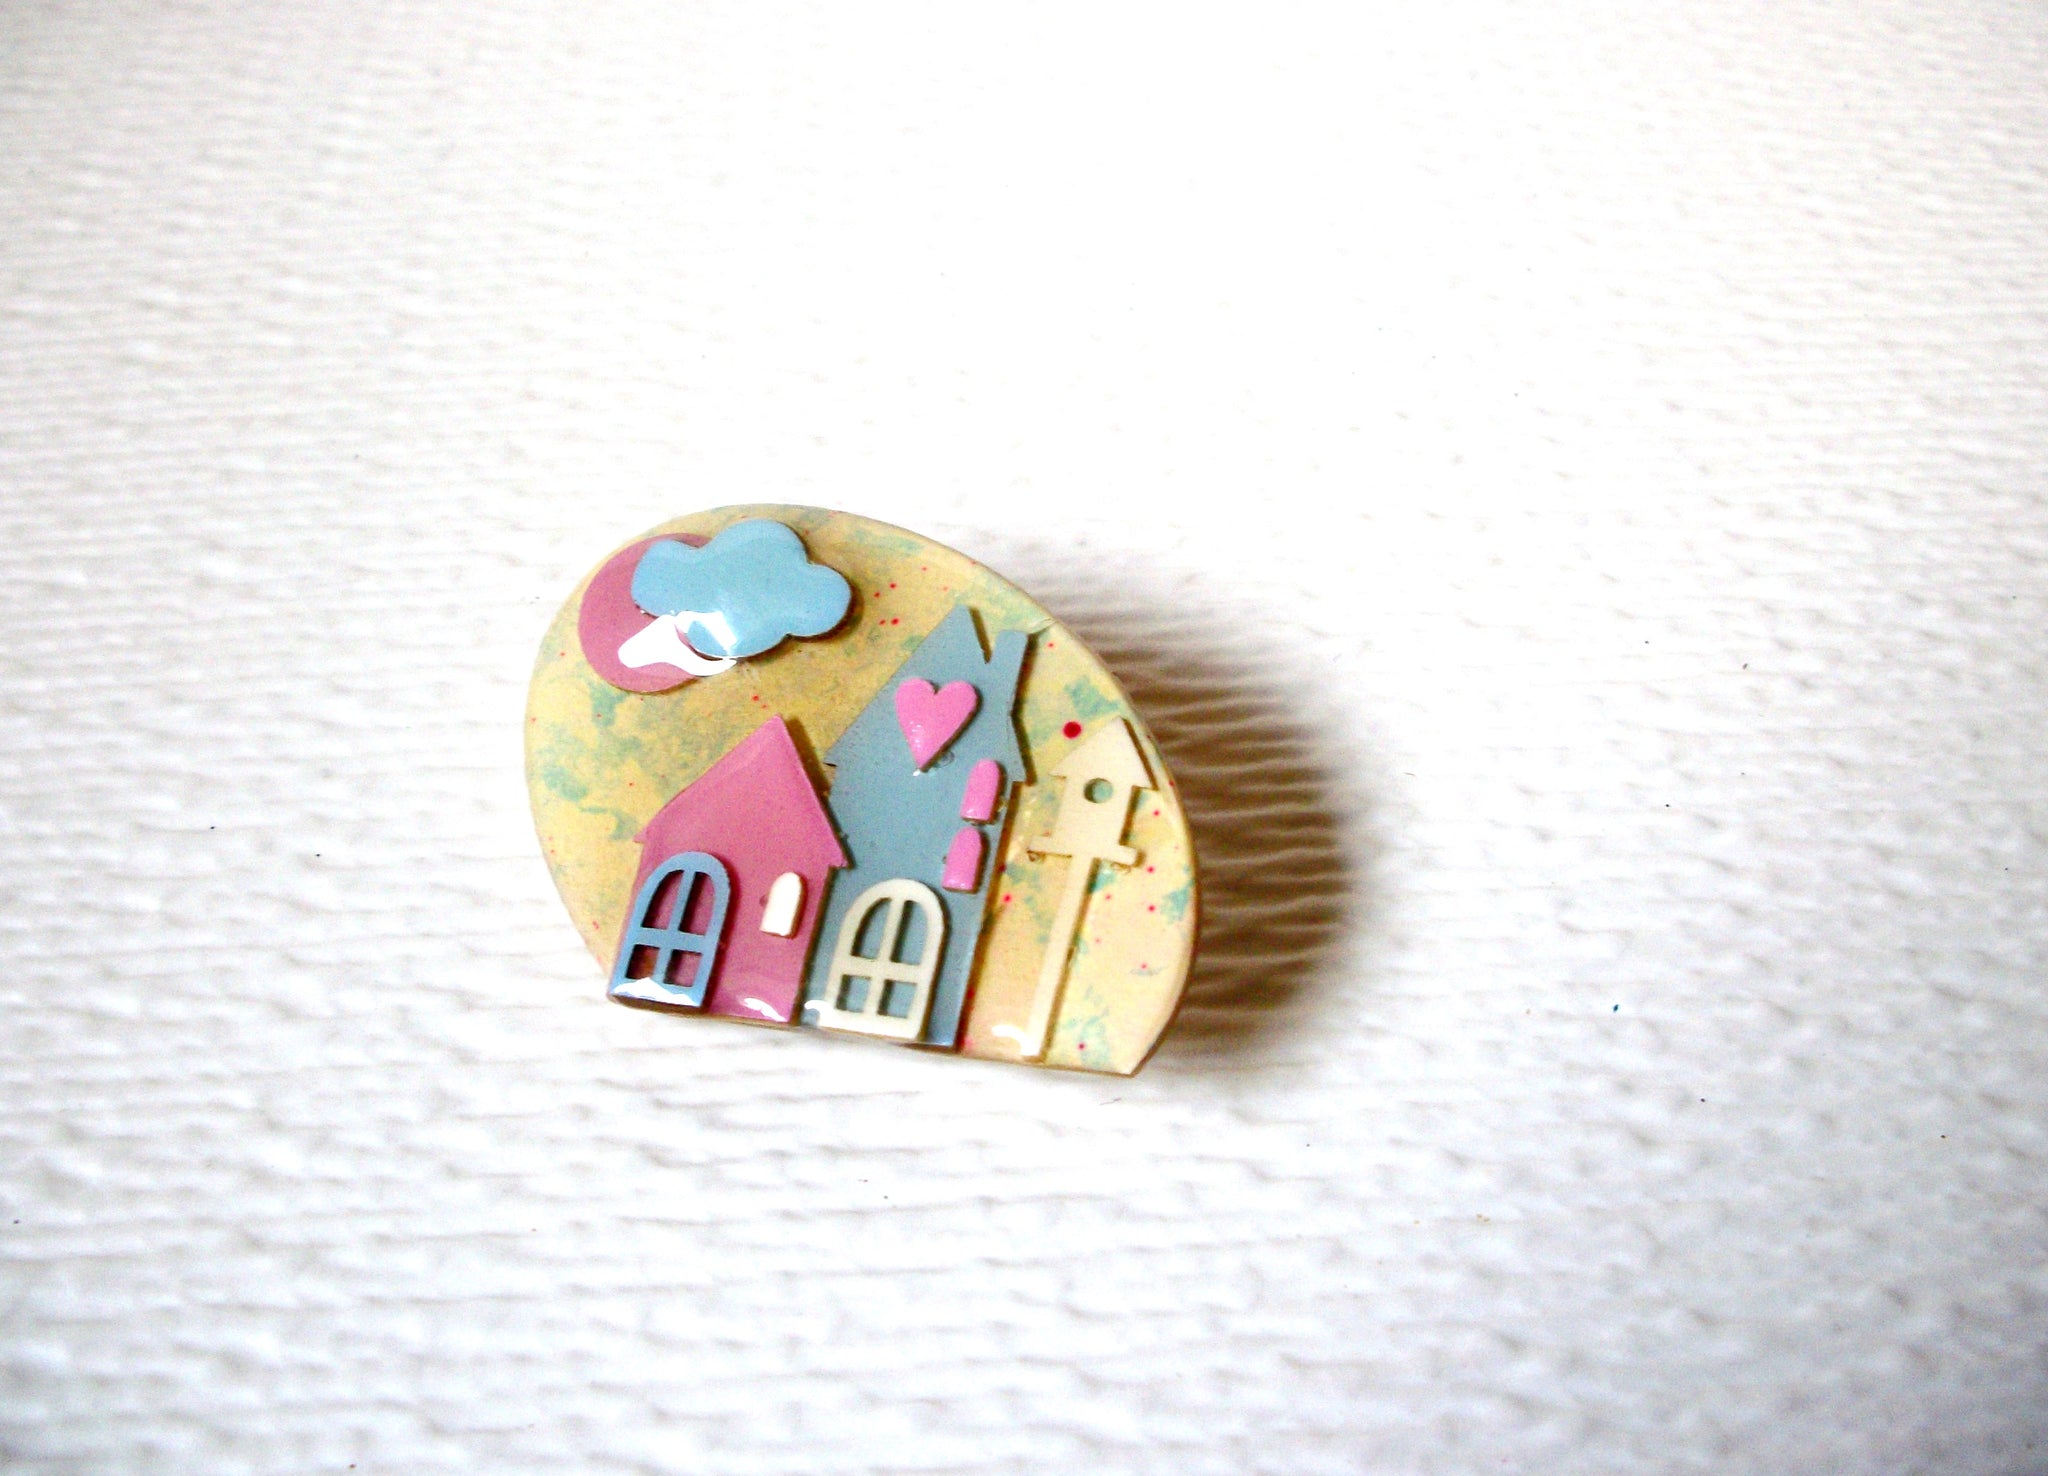 RARE Vintage House Pins By Lucinda Pastel Dream House Pins By Lucinda 122220